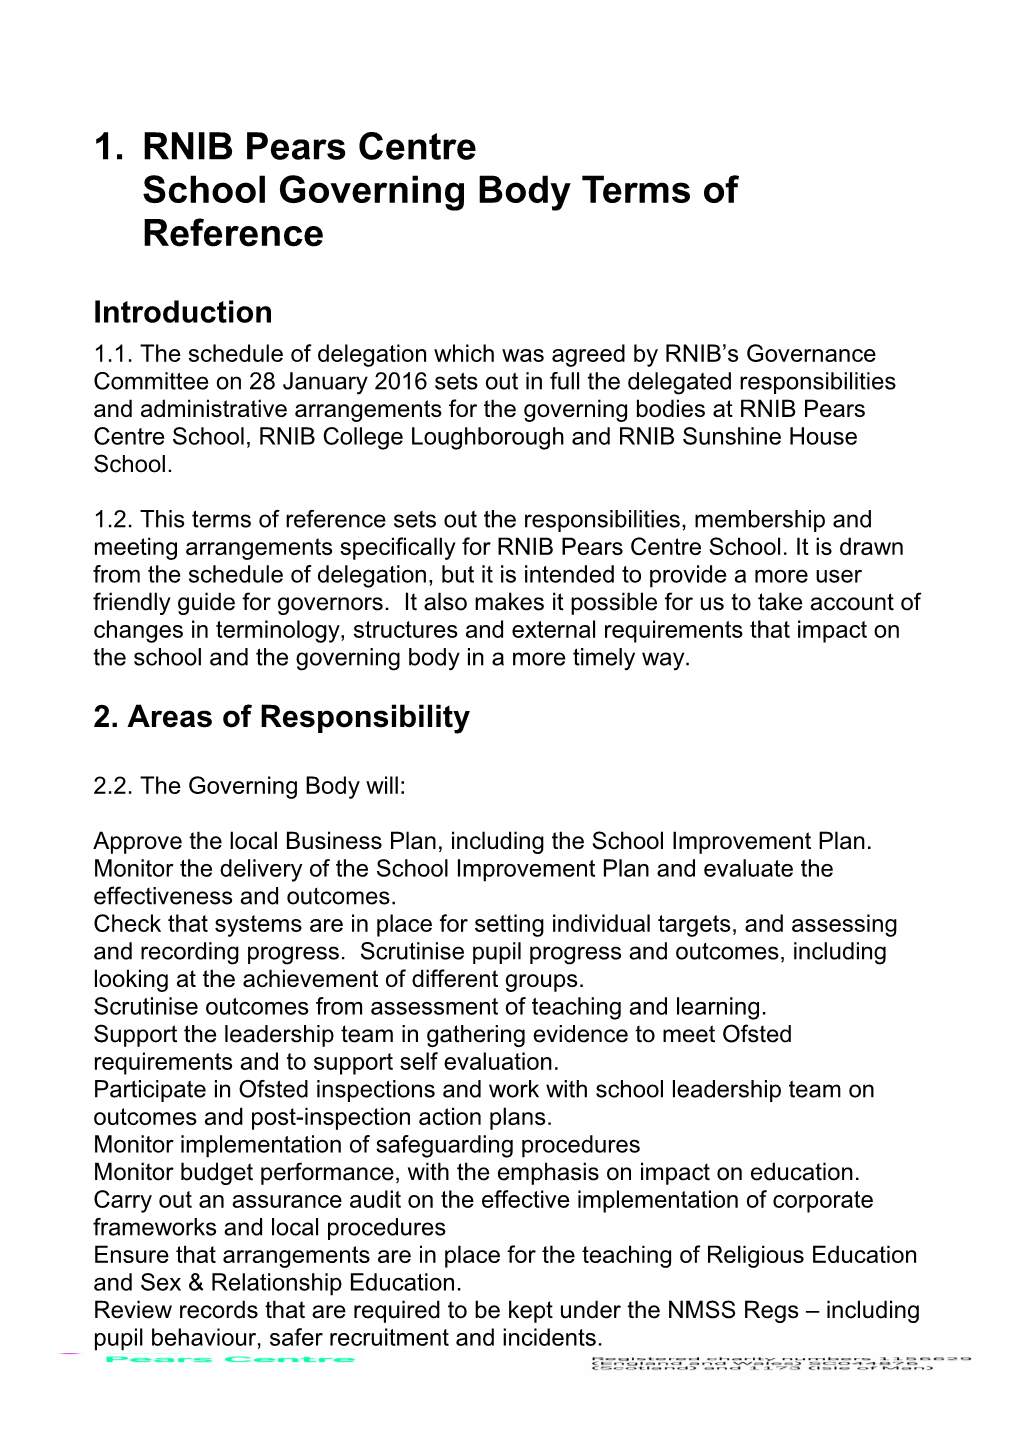 RNIB Pears Centre School Governing Body Terms of Reference